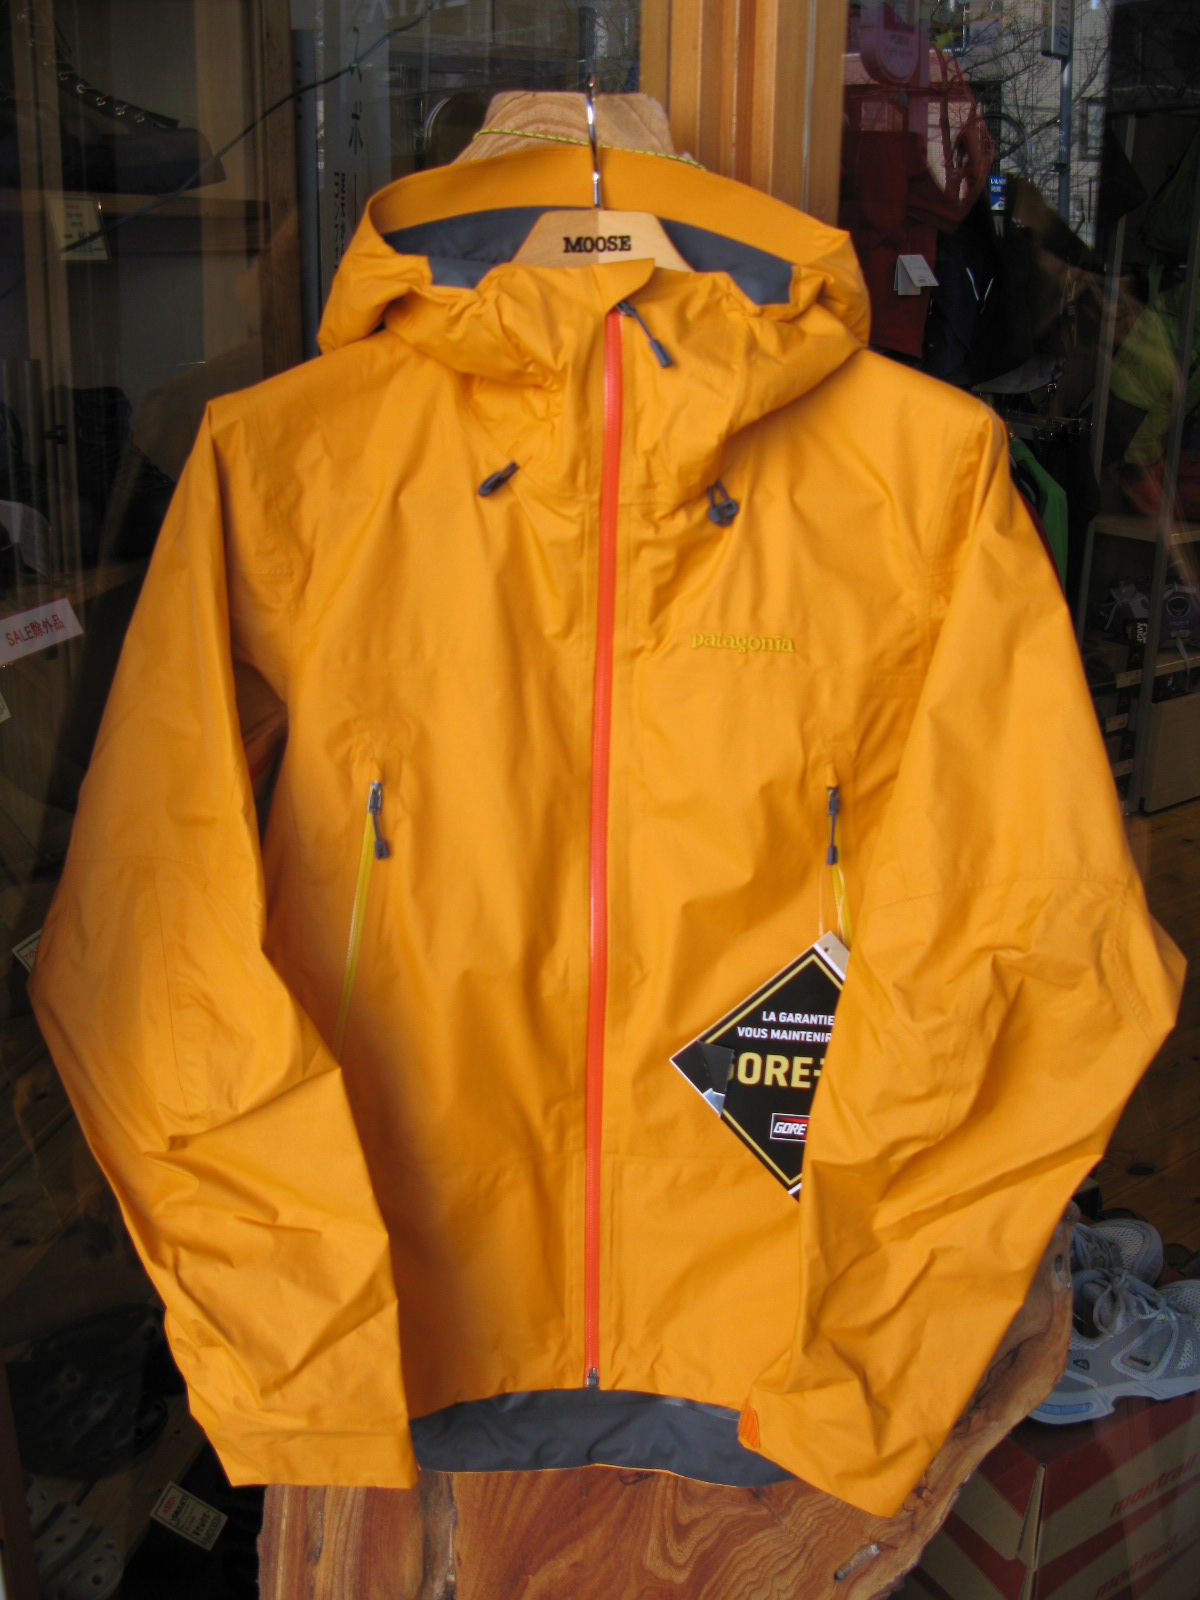 Patagonia Super Cell Jacket : OUTDOOR SHOP MOOSE ブログ